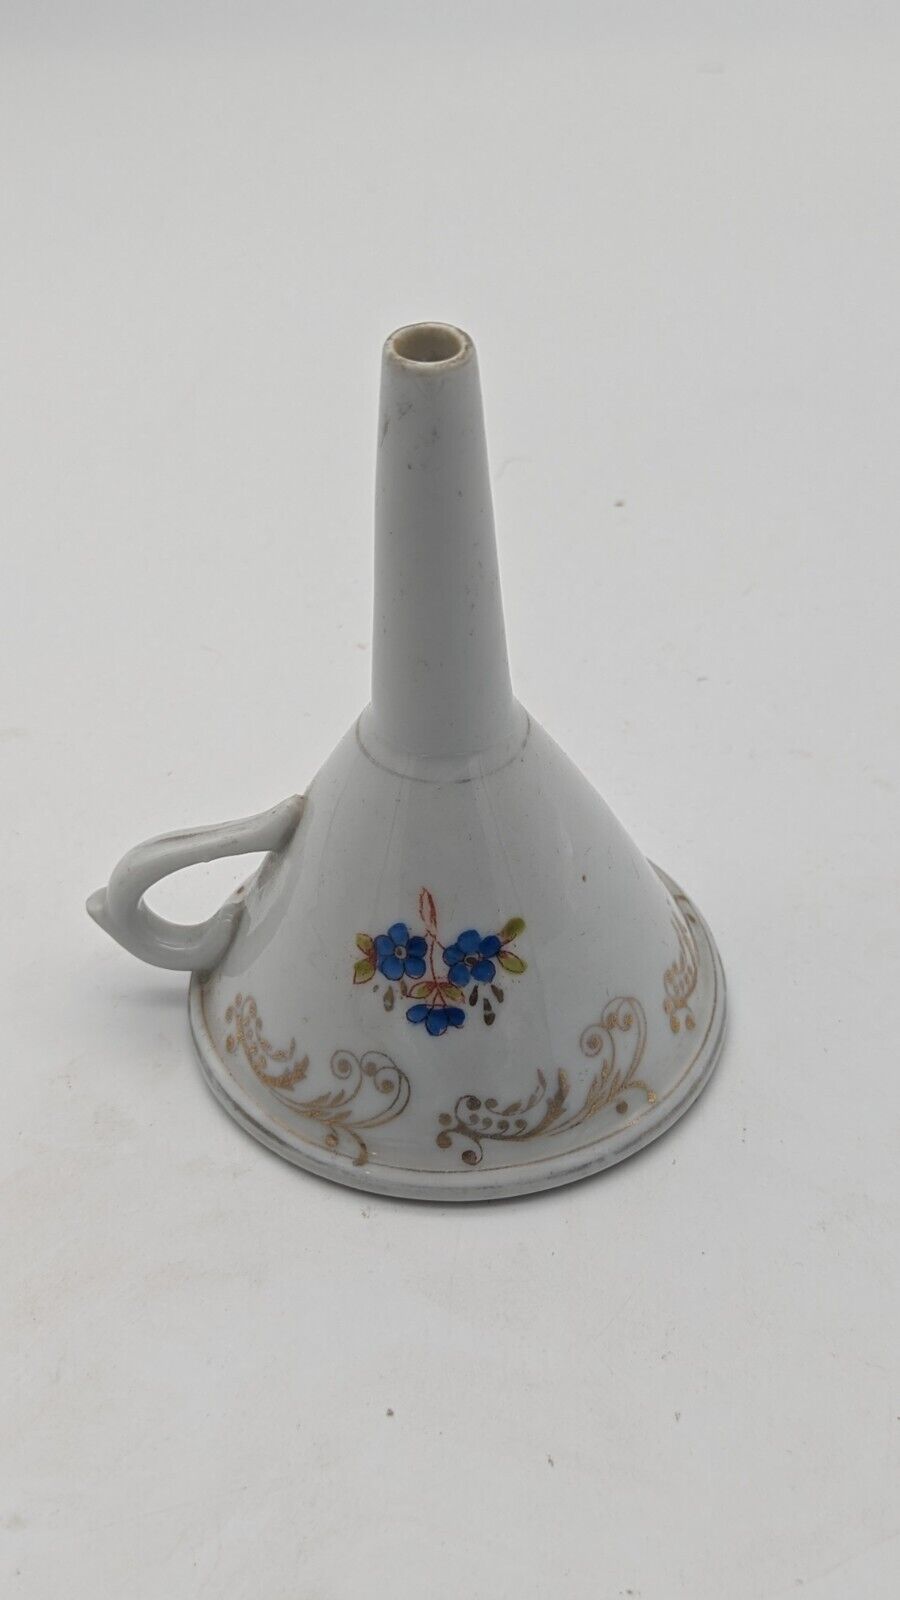 ANTIQUE PORCELAIN Apothecary FUNNEL - RARE HTF Great Condition 